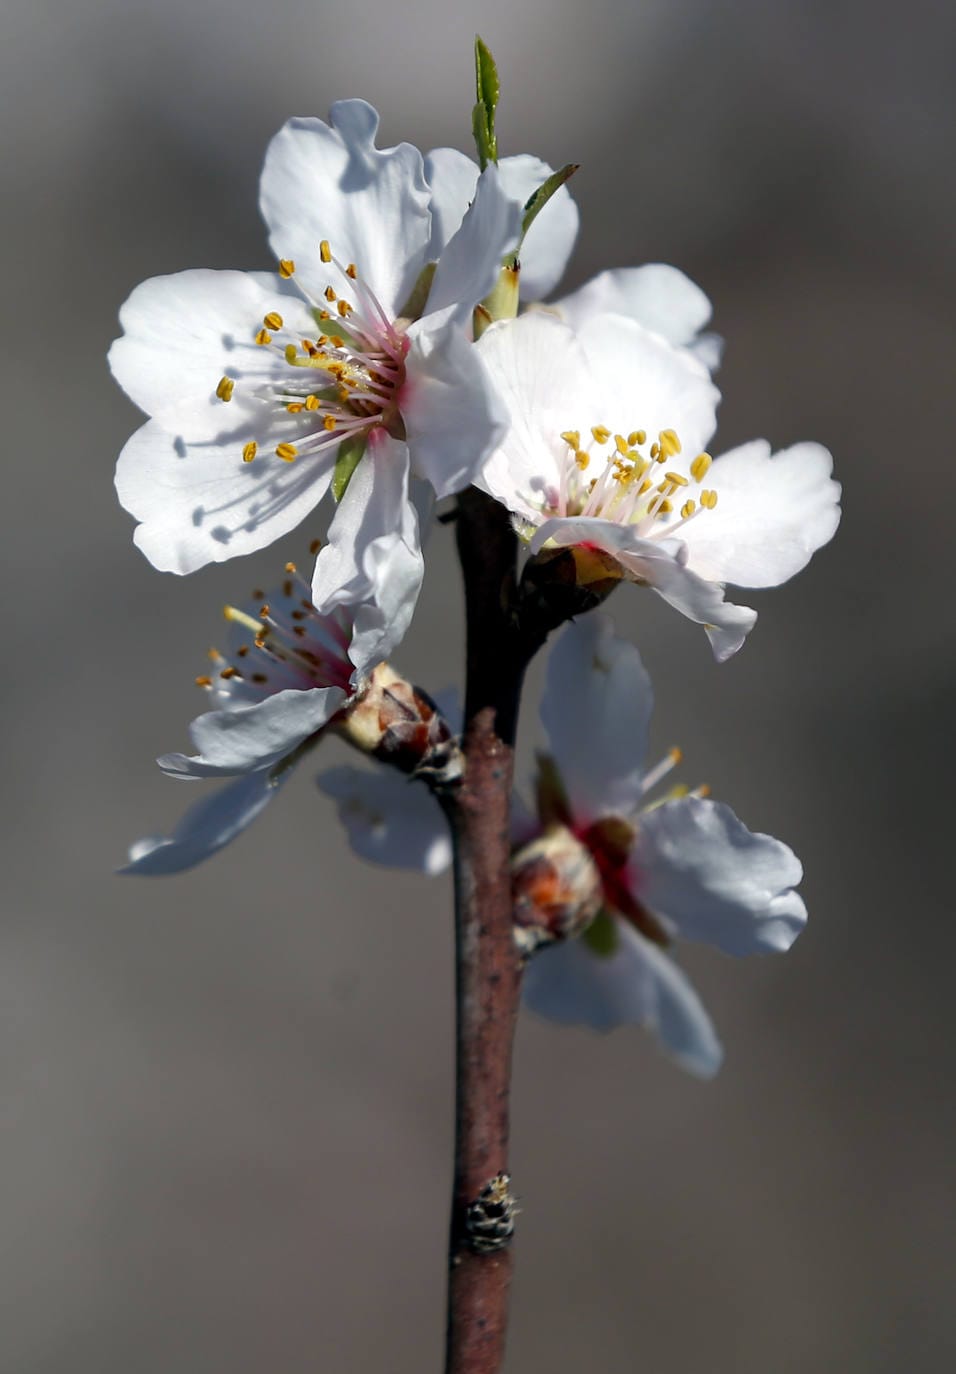 Almond trees in flower across the province - in pictures